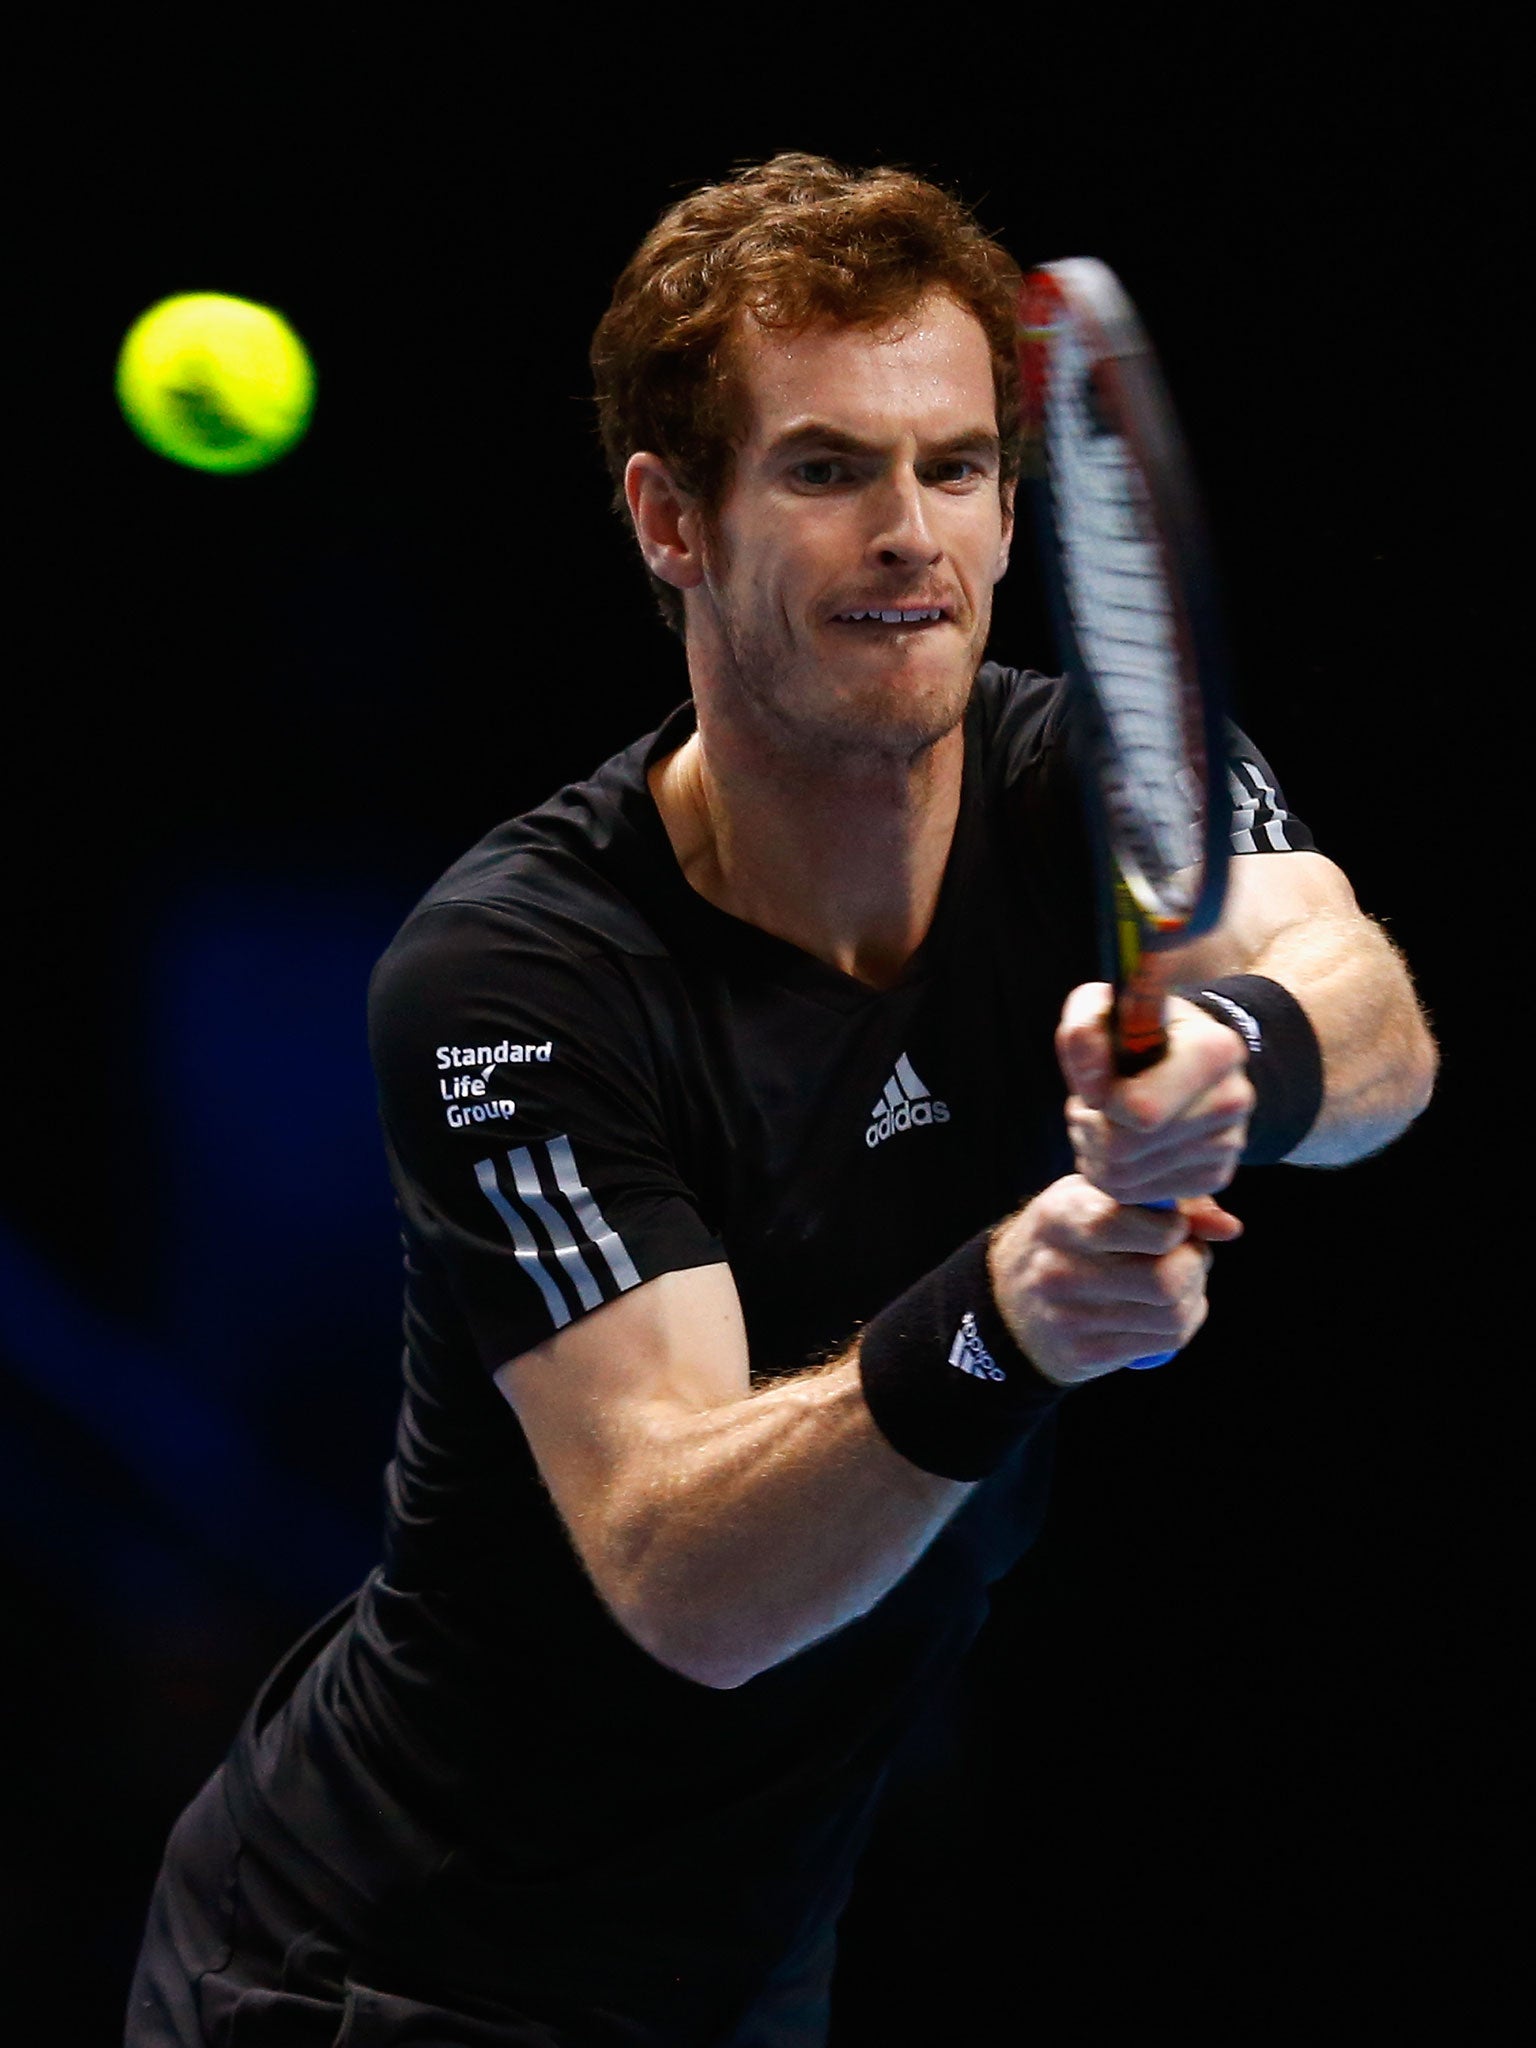 Andy Murray during the exhibition game against Djokovic